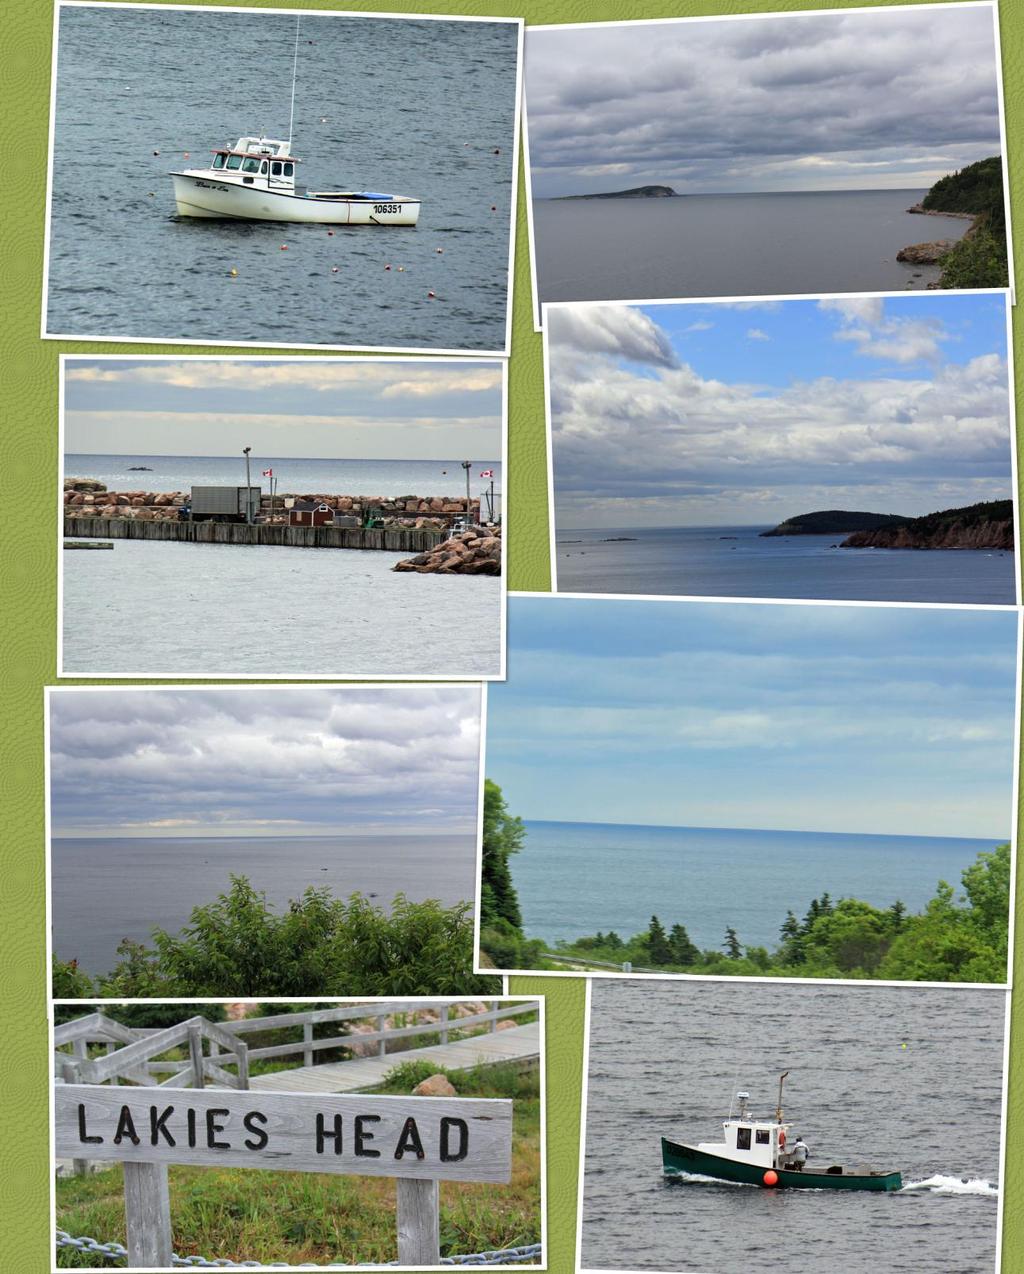 Neil's Harbor is a small fishing village in Northern Cape Breton Island.